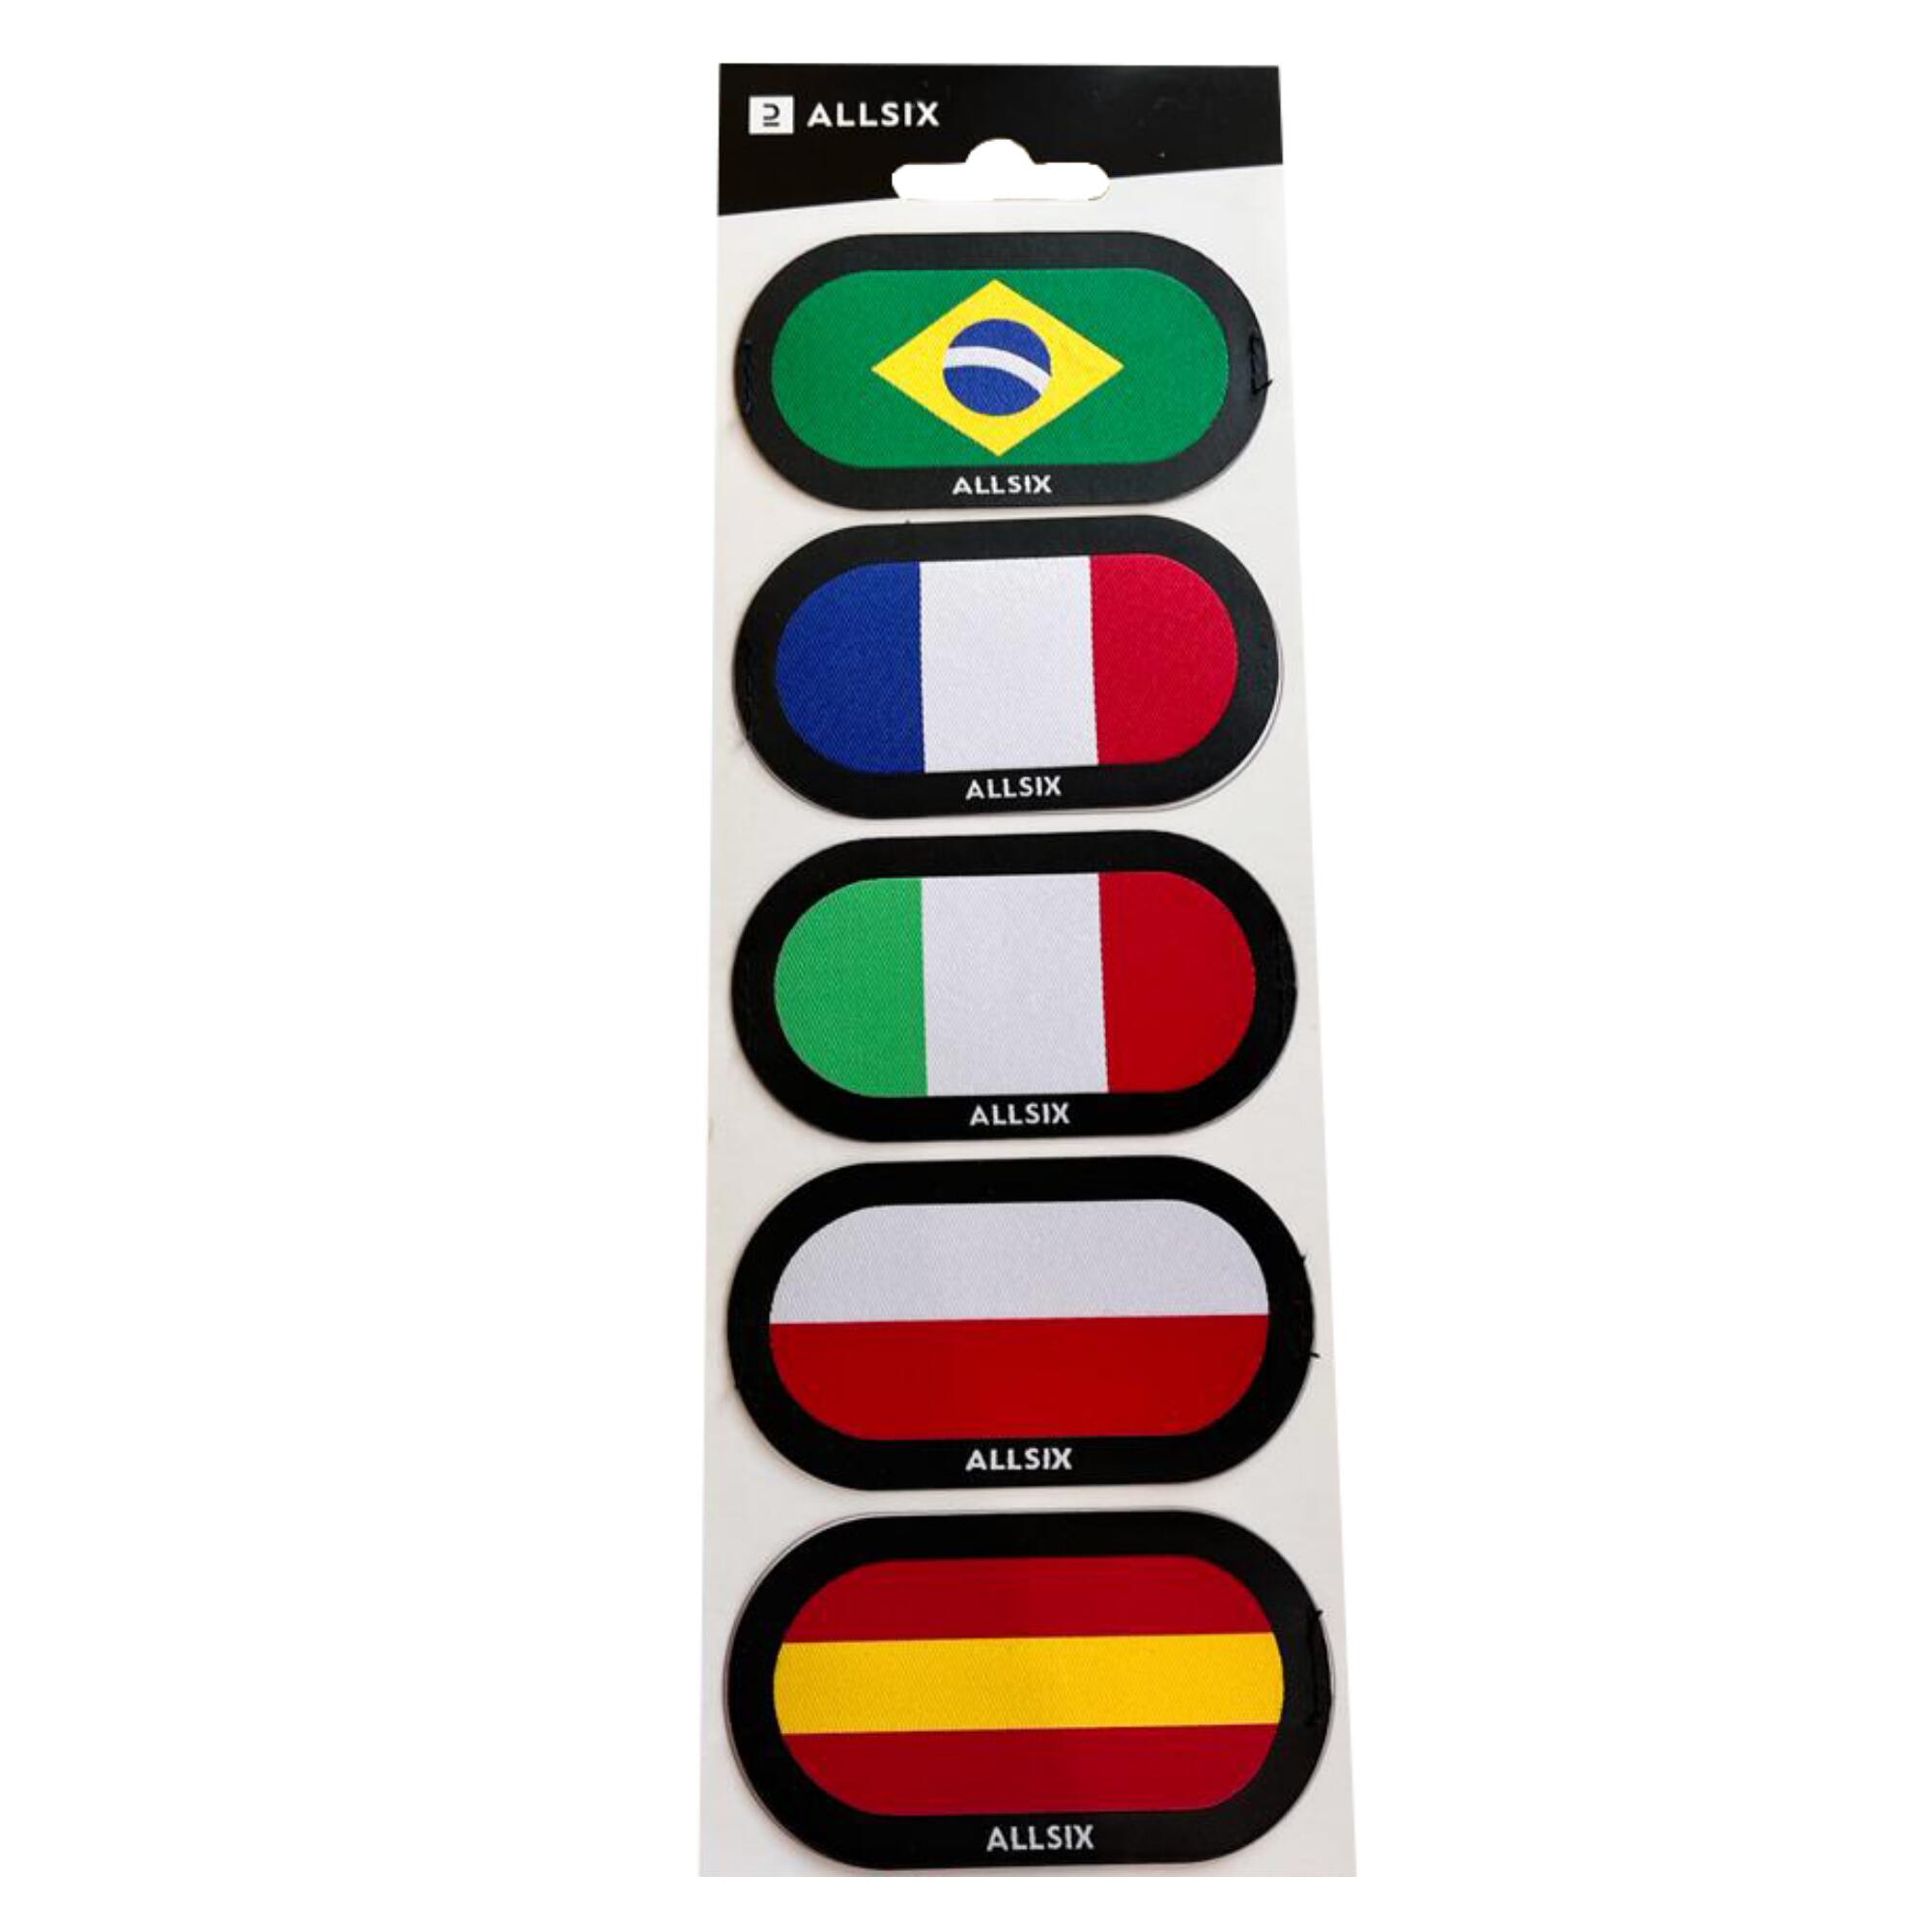 ALLSIX Volleyball Sticker Patch Kit Five-Pack - Countries